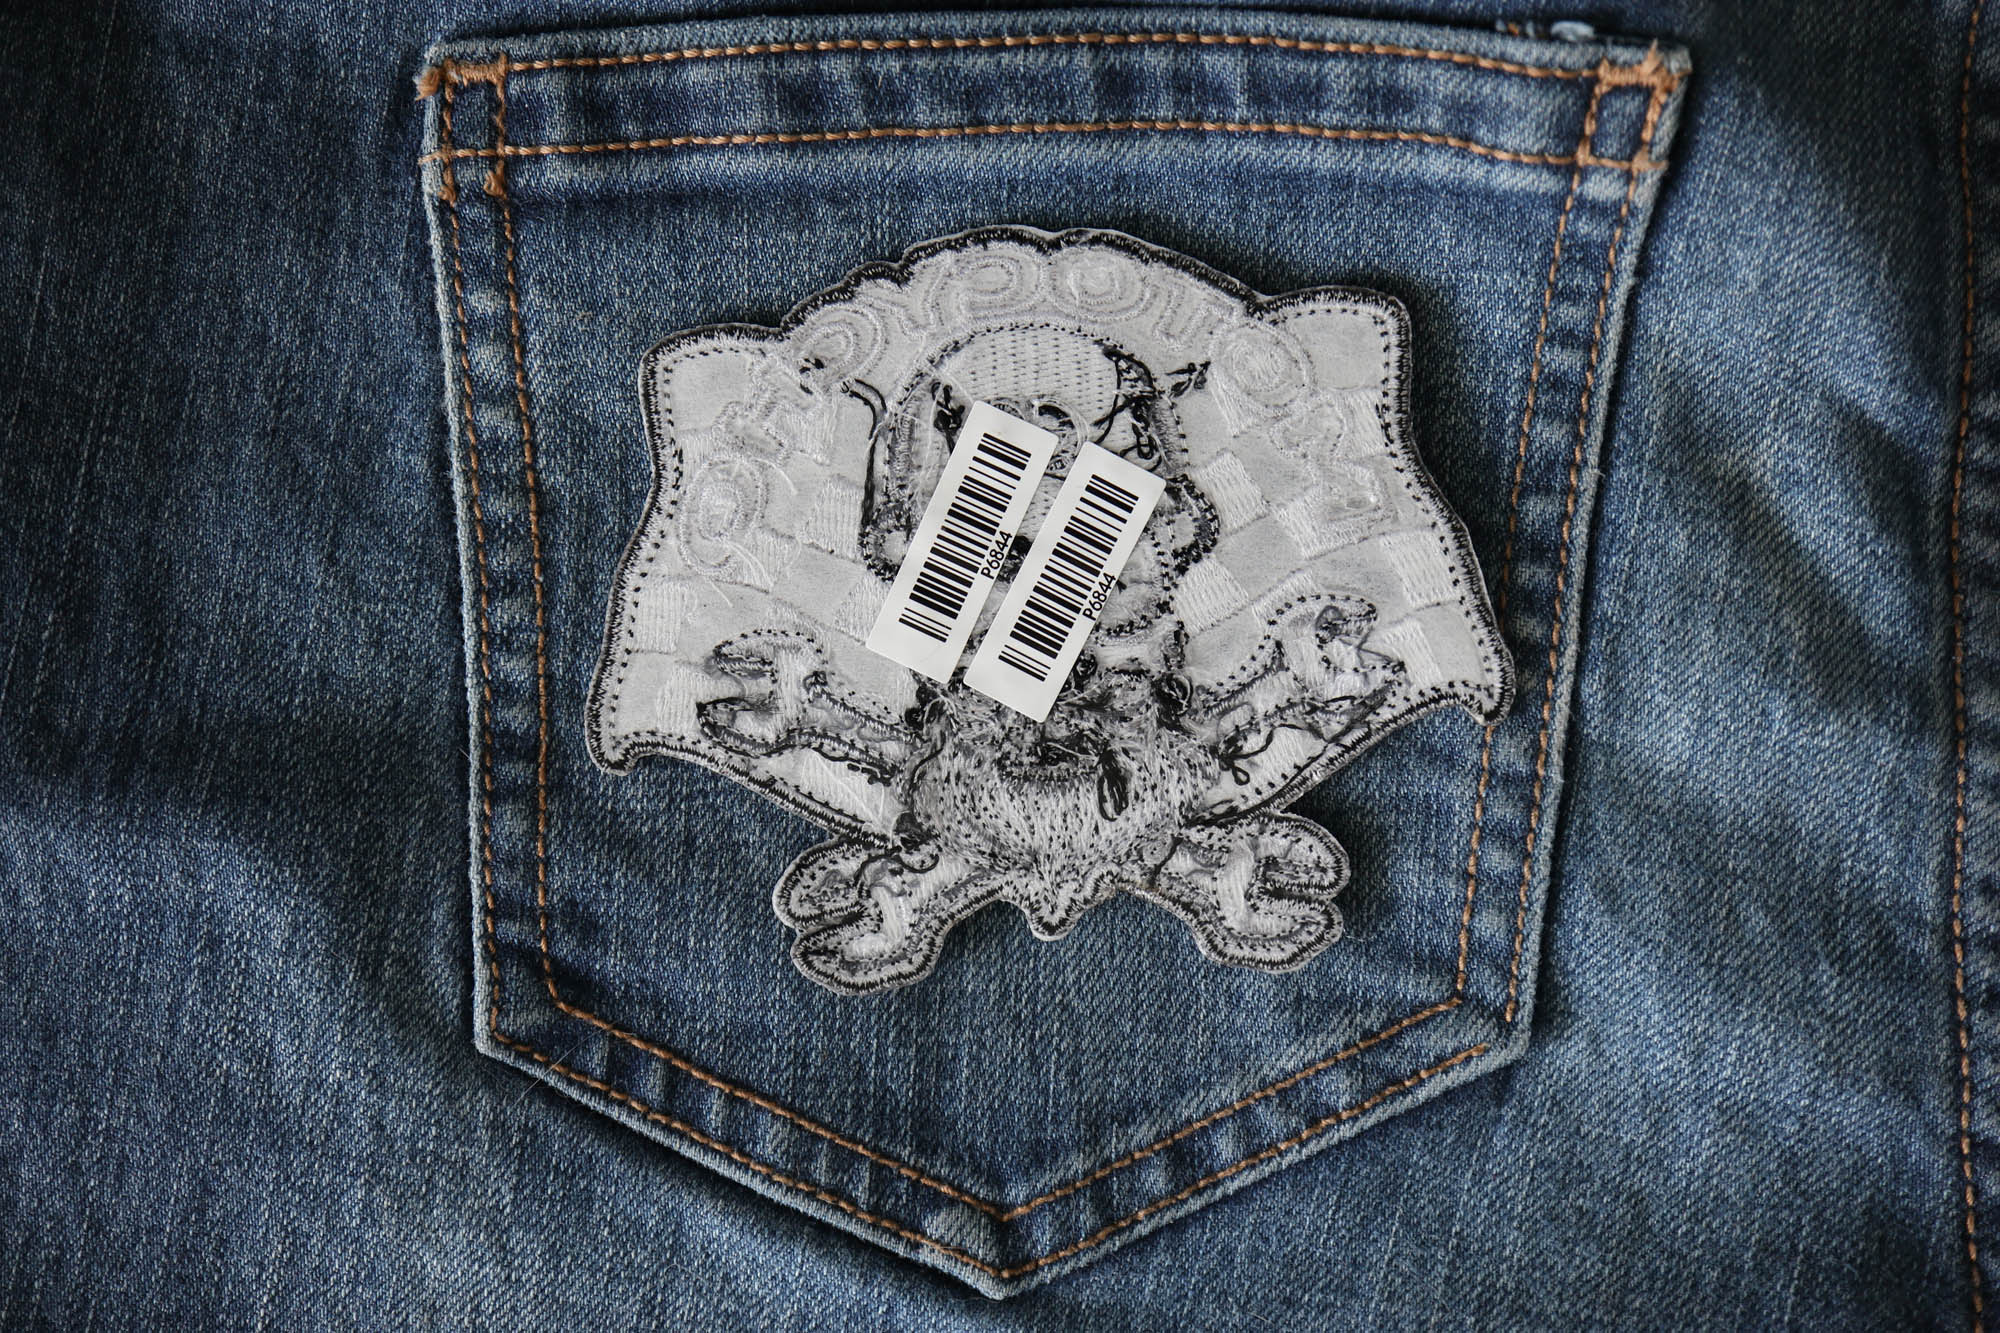 Motocycho Skull Small Embroidered Biker Patch - TheCheapPlace